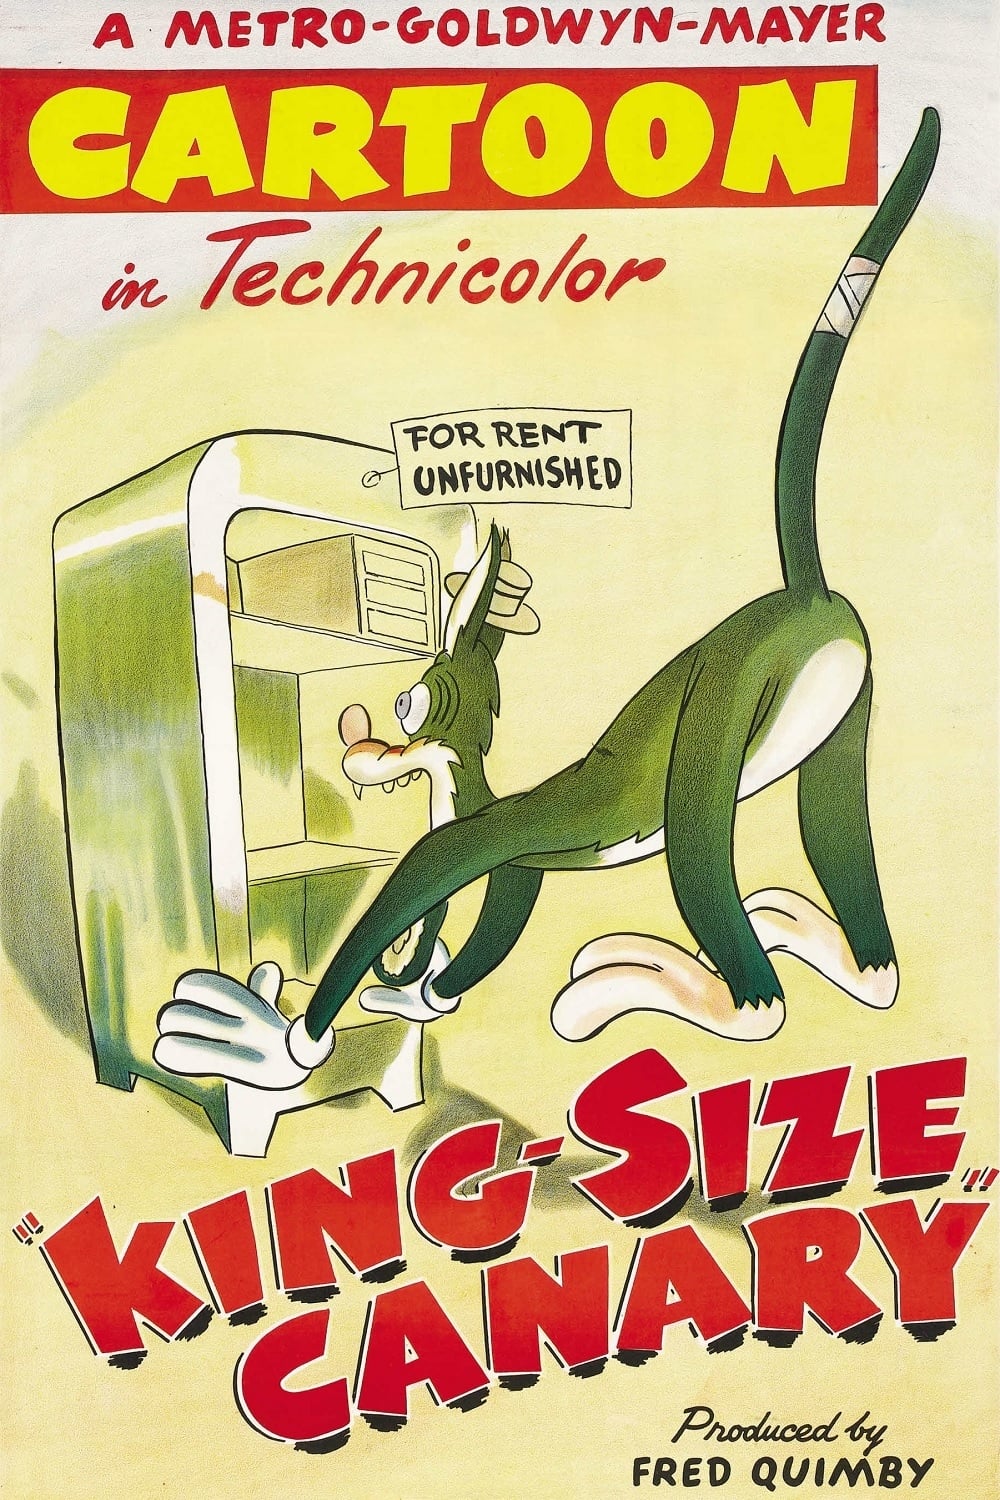 King-Size Canary (1947)